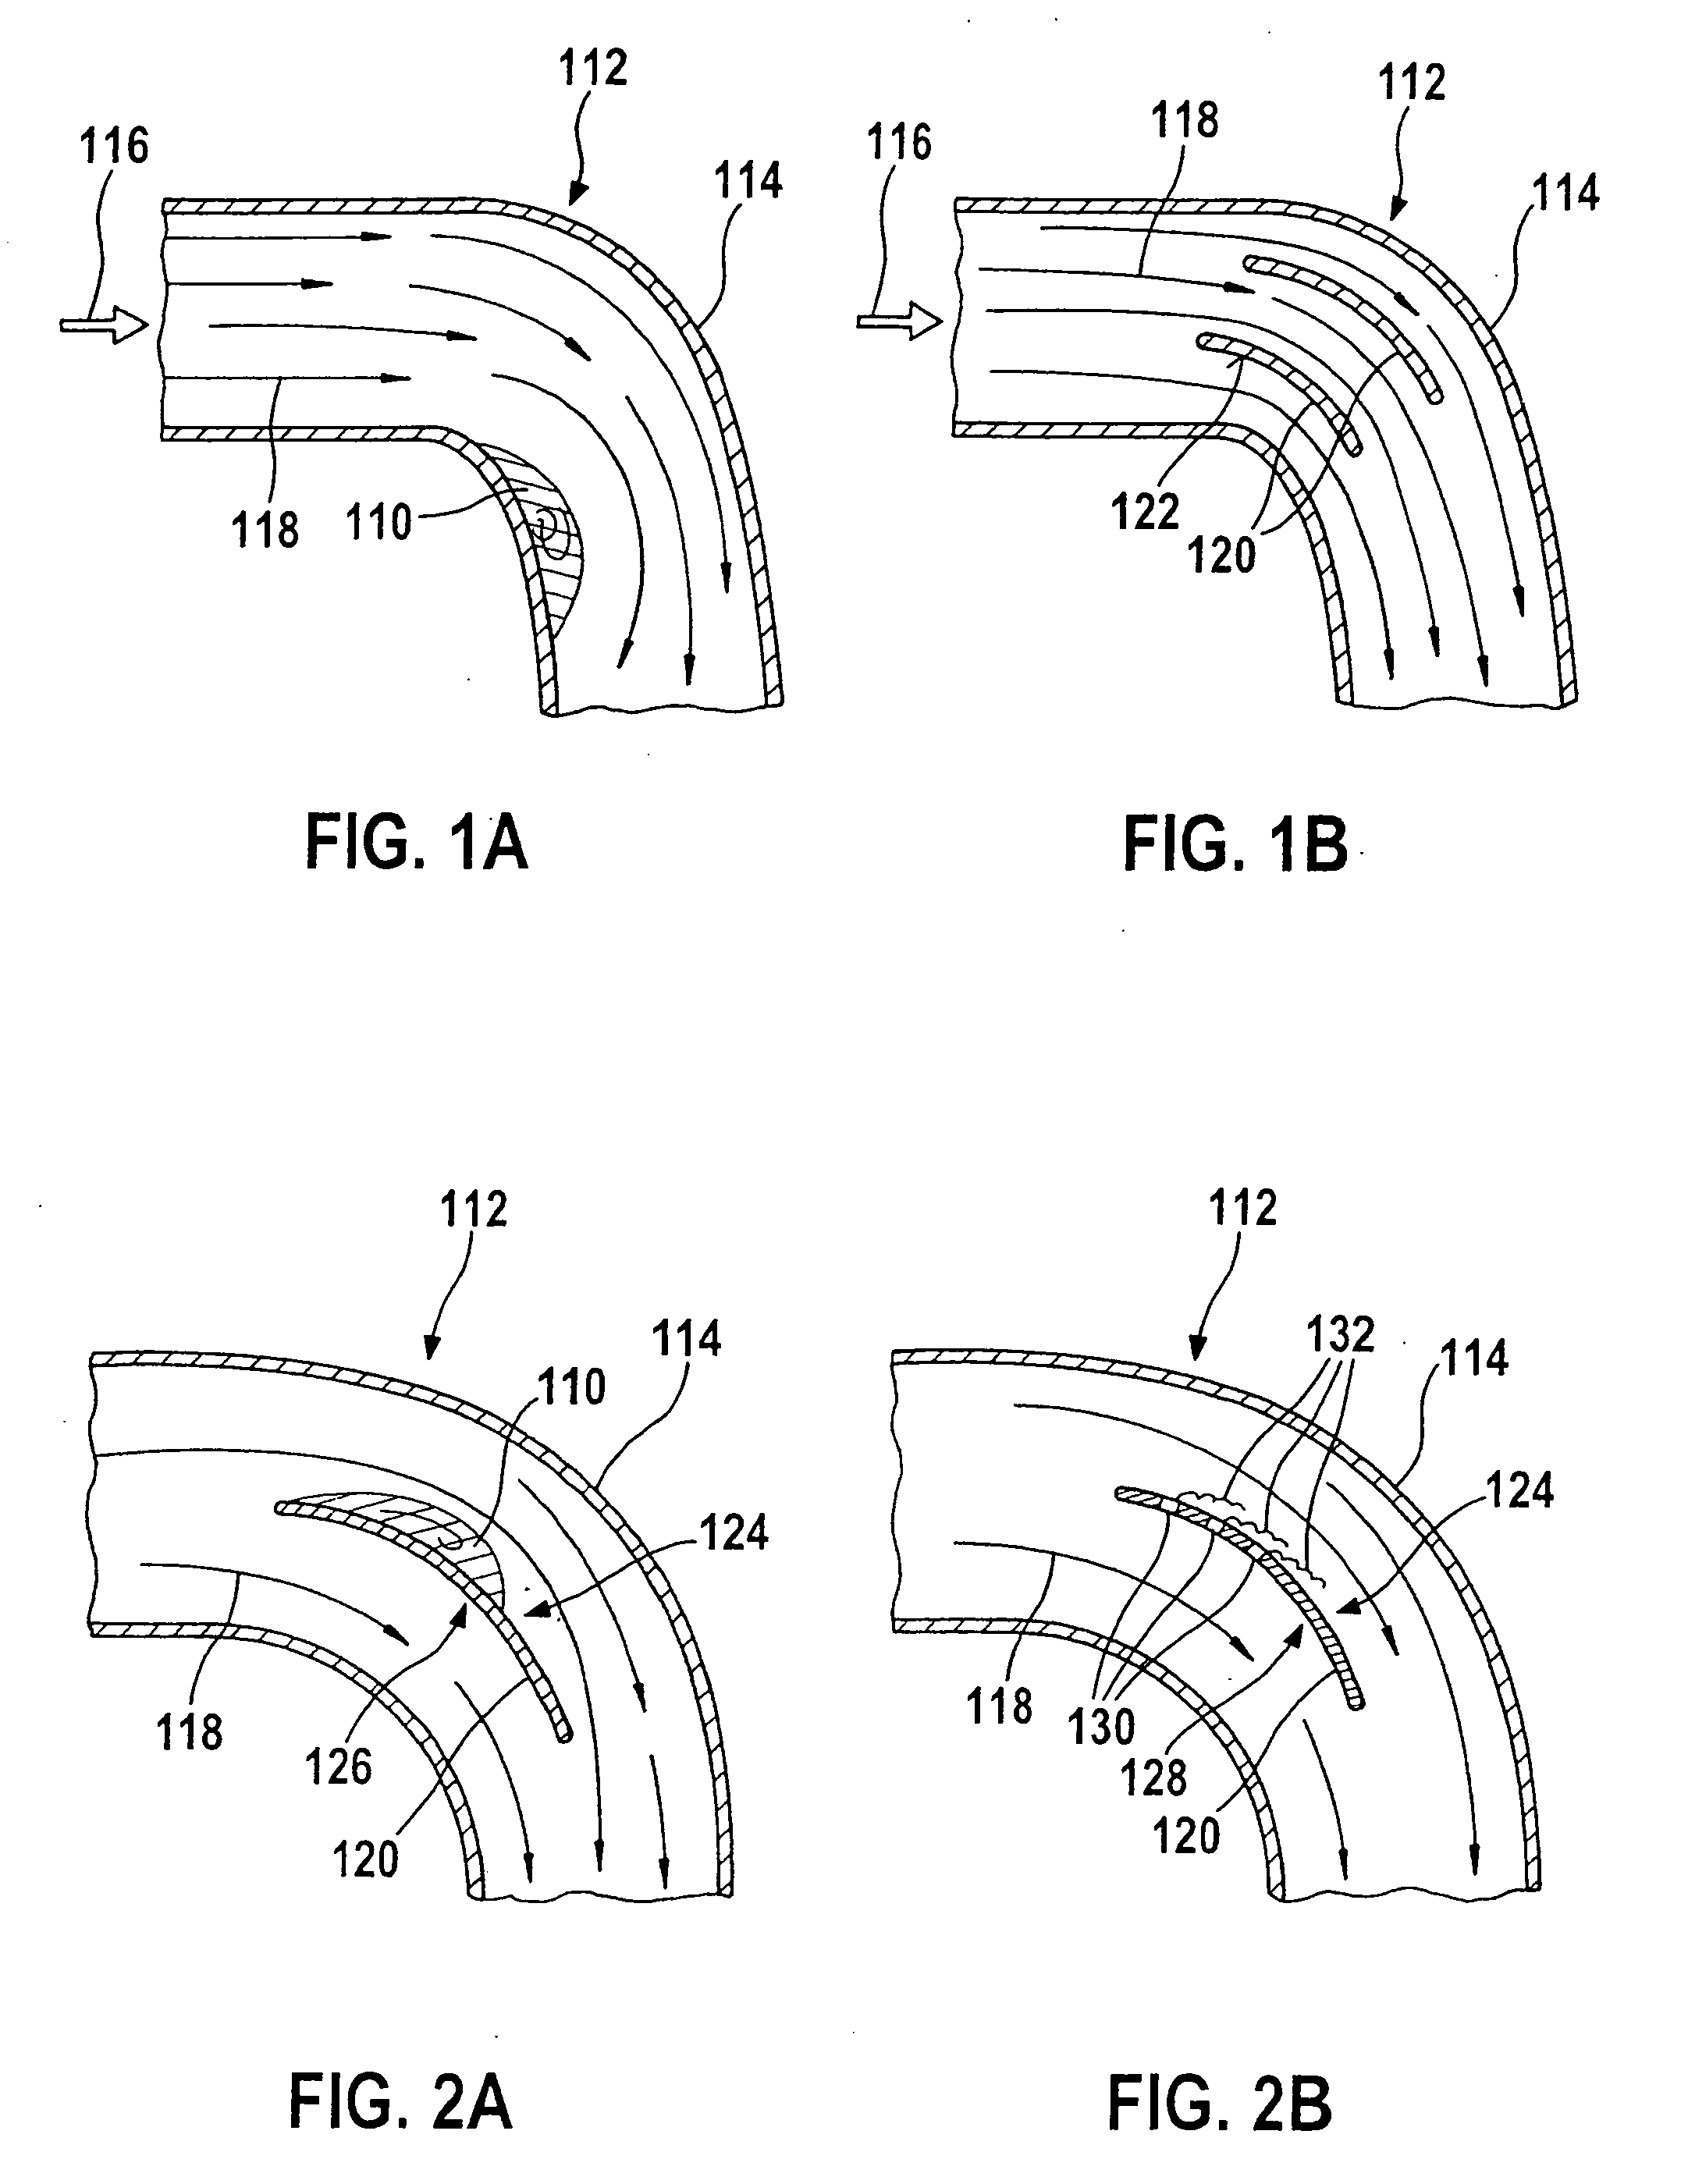 Flow guide element for guiding the flow of a fluid medium